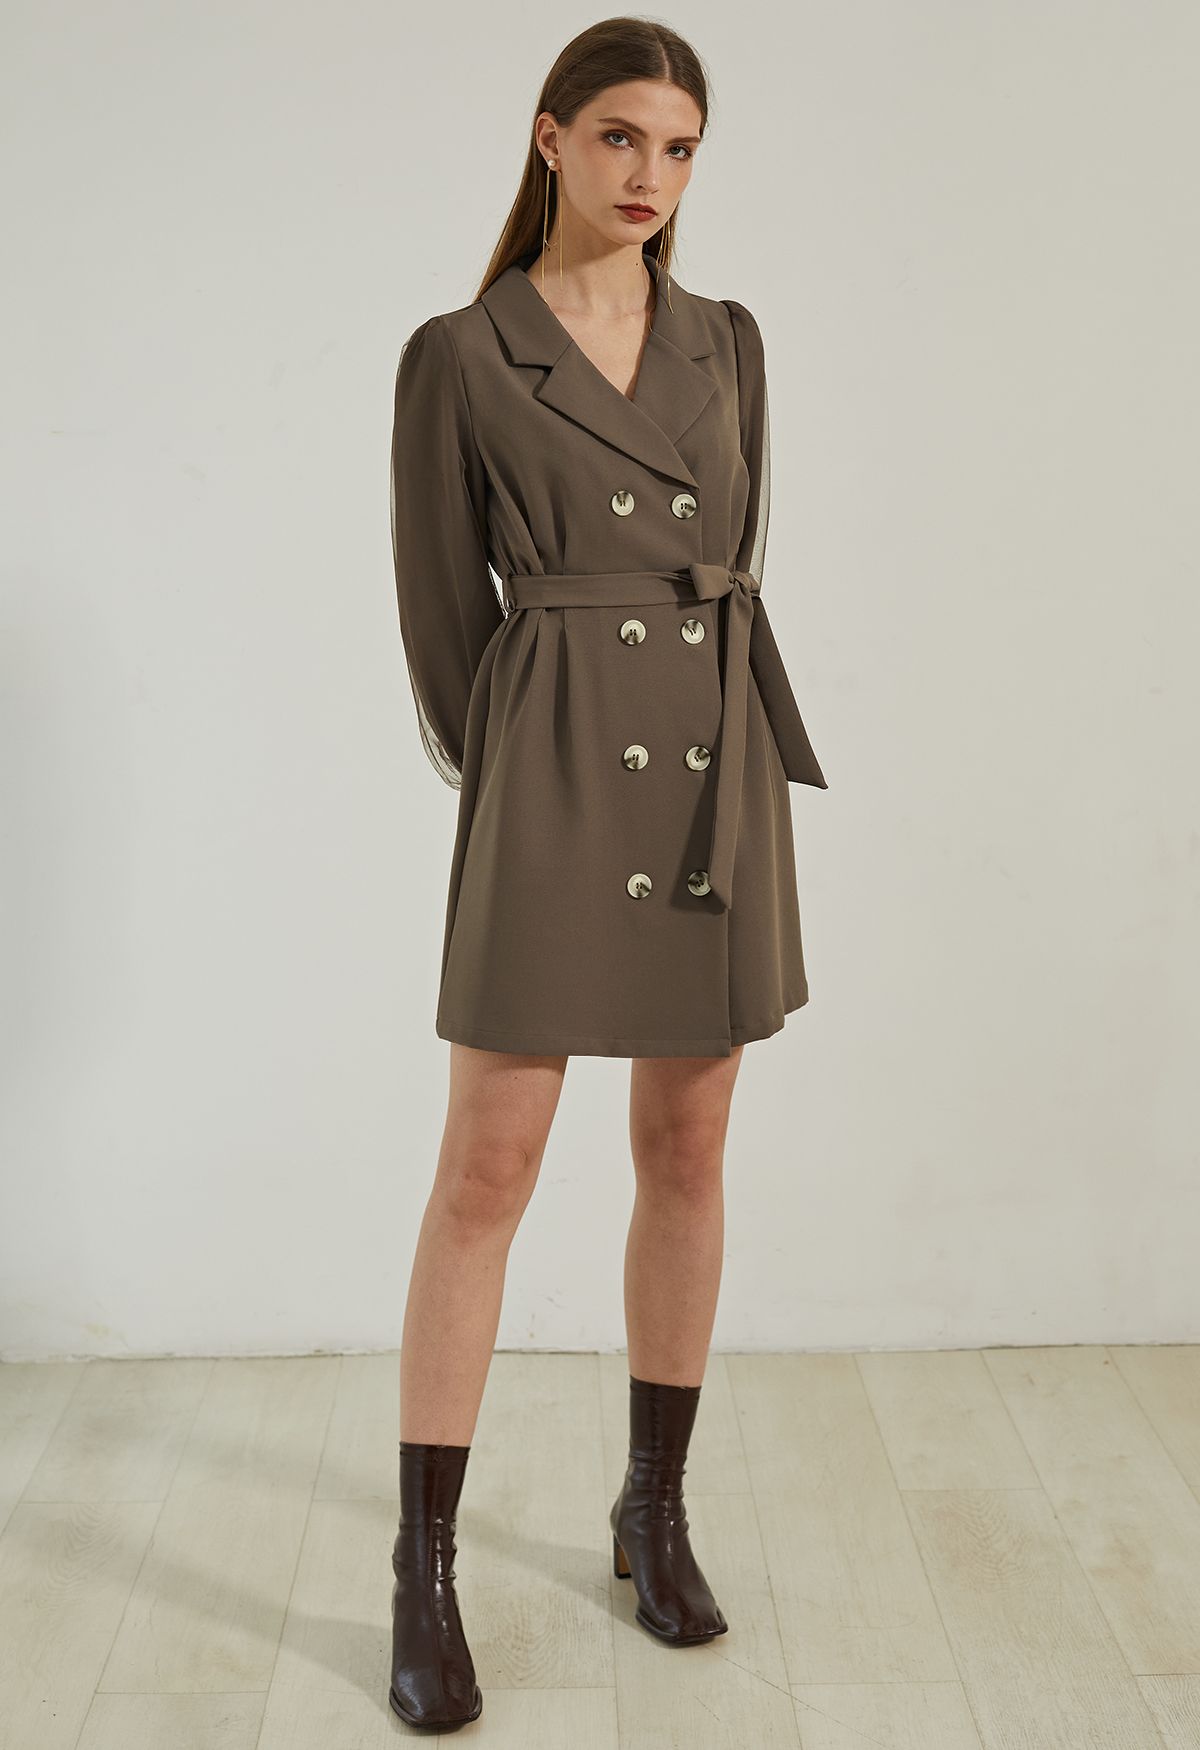 Mesh Overlay Sleeve Double Breasted Blazer Dress in Brown